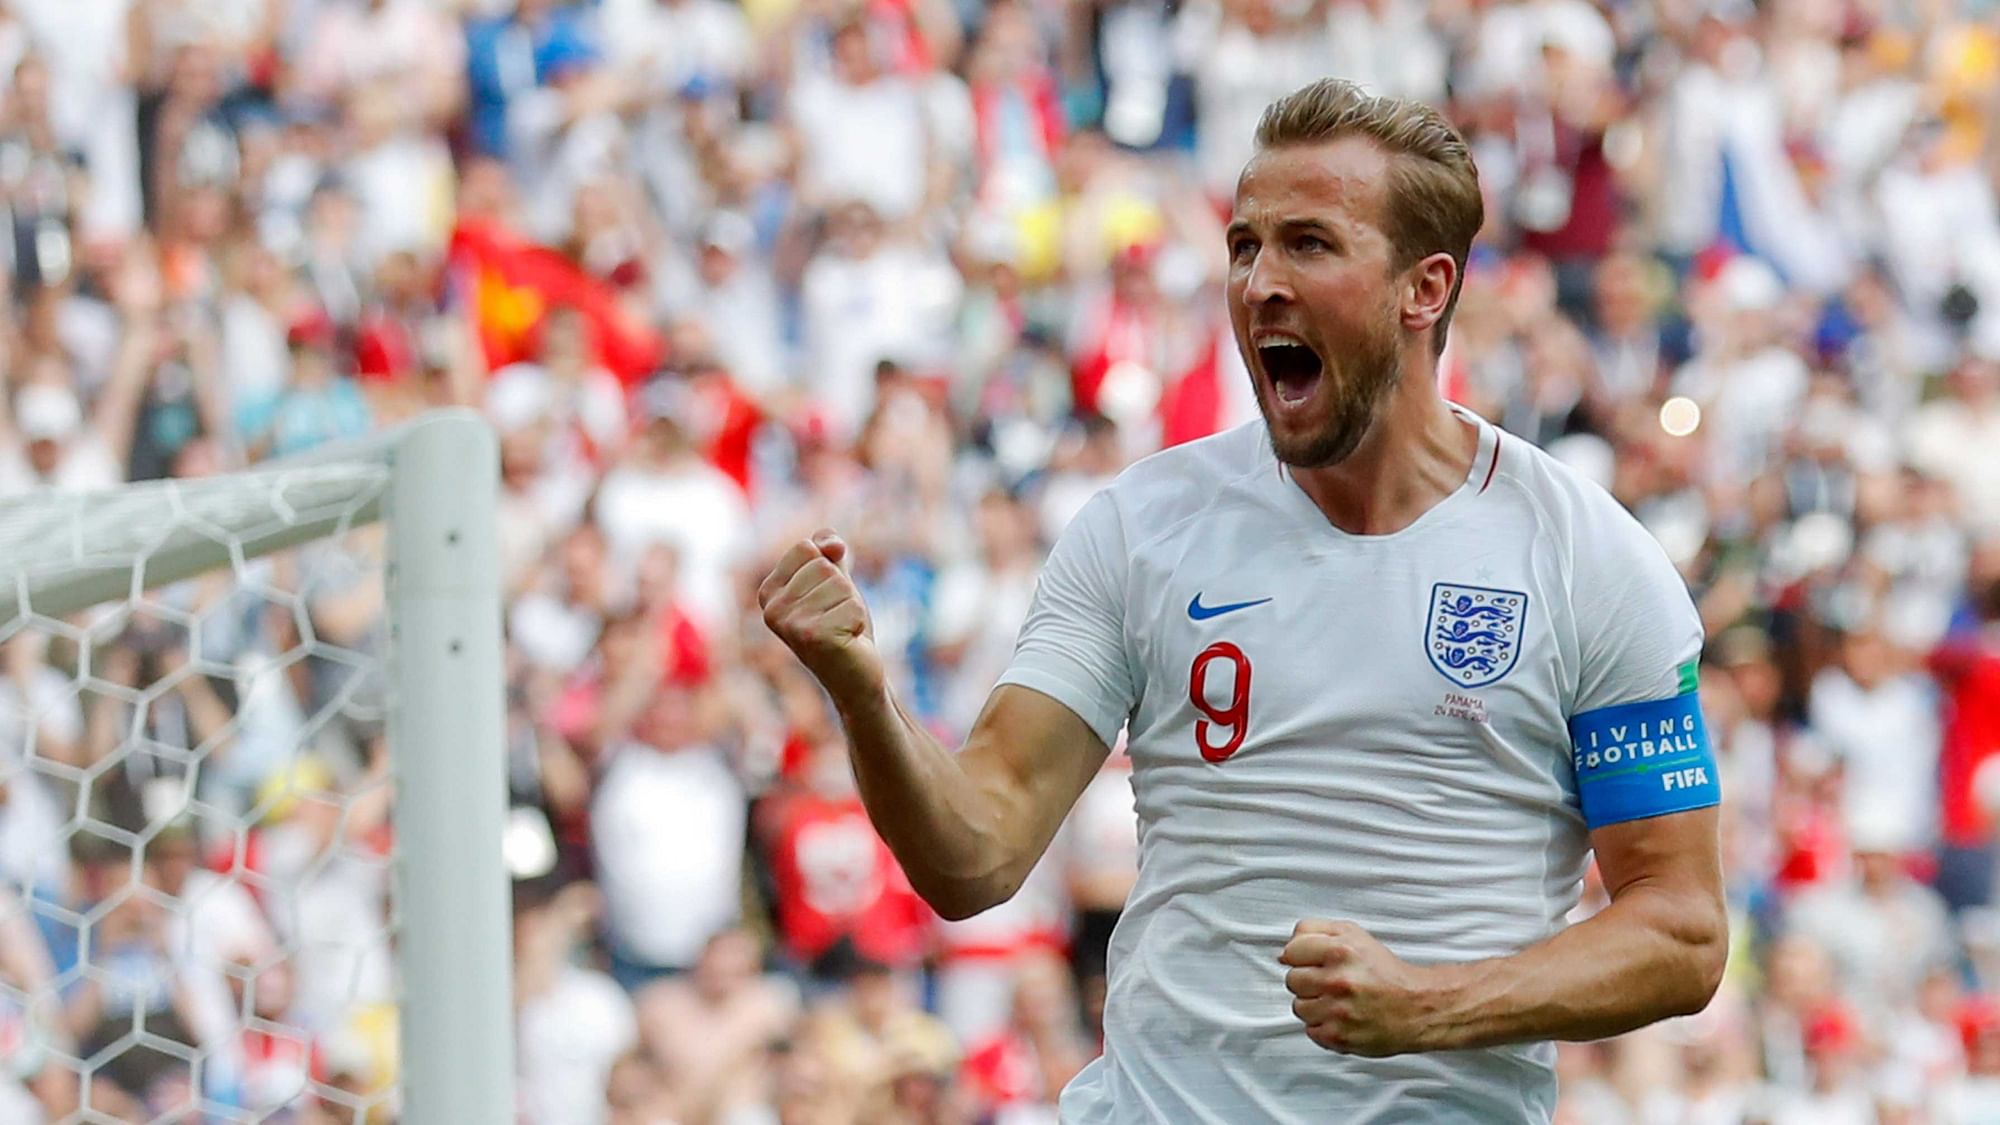 England’s Harry Kane celebrates after he scored his side’s second goal during the group G match between England and Panama at the 2018 soccer World Cup at the Nizhny Novgorod Stadium in Nizhny Novgorod , Russia, Sunday, June 24, 2018.&nbsp;